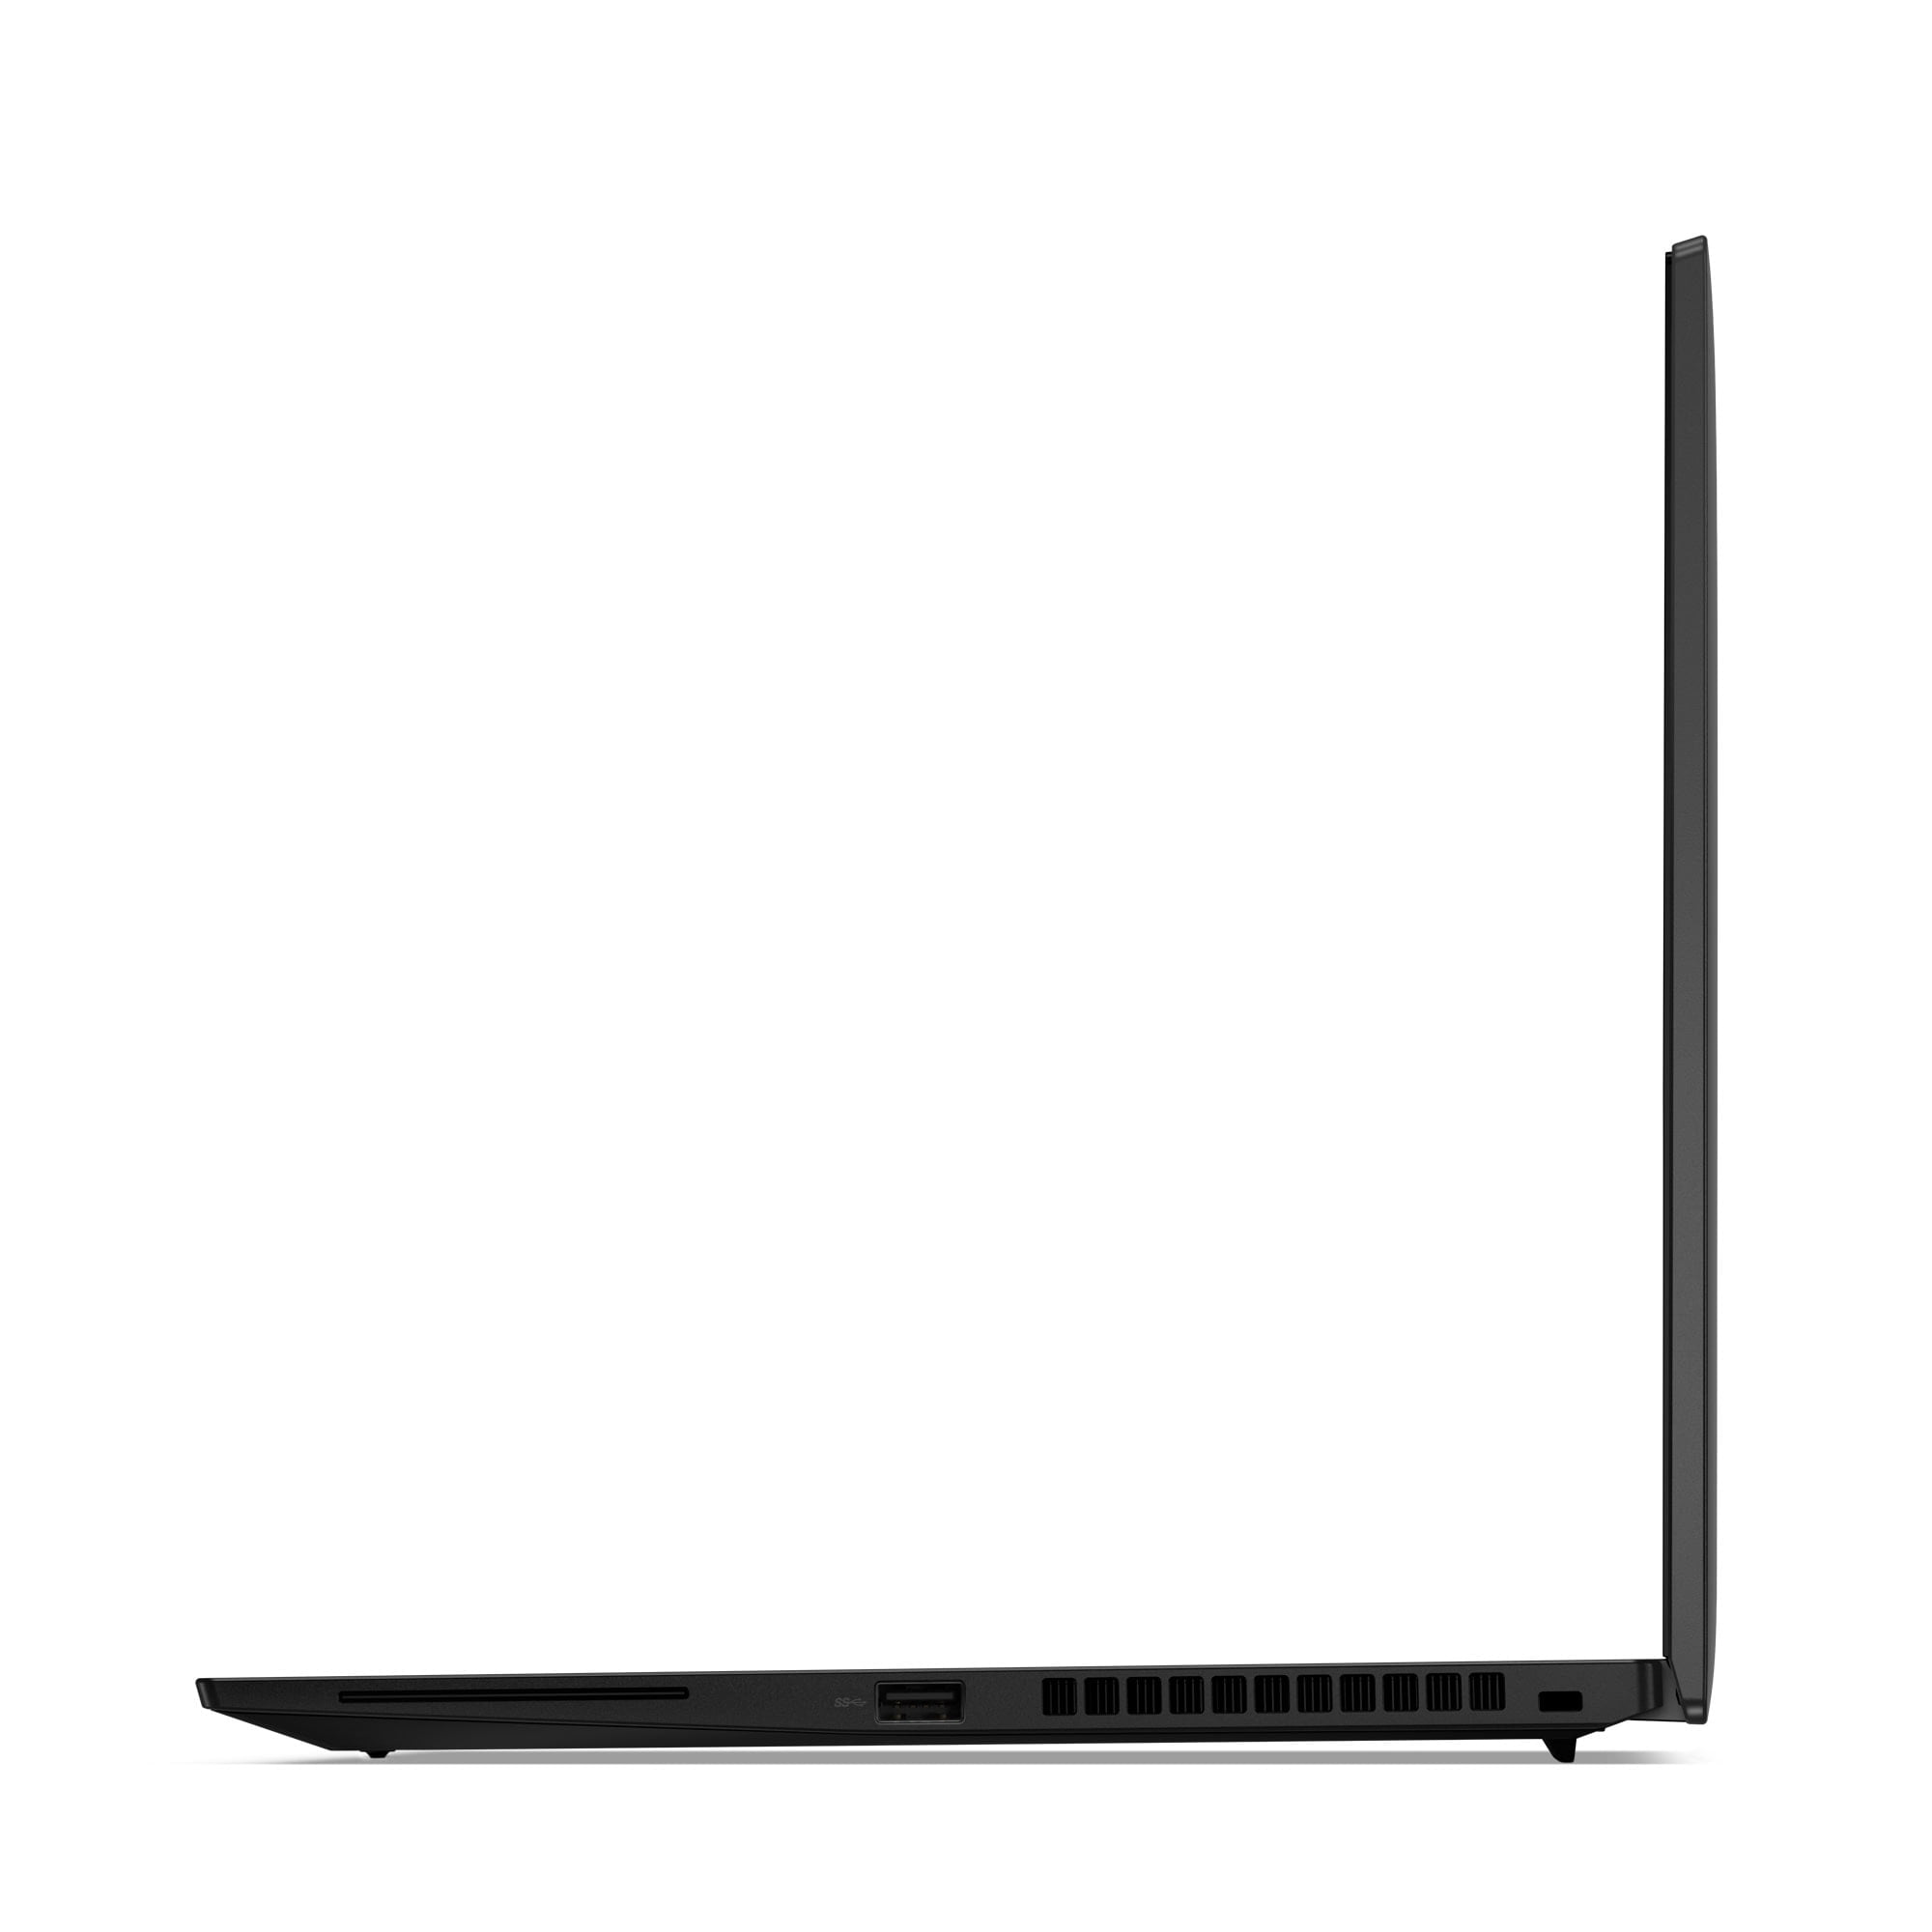 lethal Sociology Light Lenovo ThinkPad T14s Gen 3 Intel Laptop, 14.0" IPS Touch Low Cost Low  Weight, vPro®, Iris Xe Graphics, 32GB, 2TB, Win 10 Pro Preinstalled Through  Downgrade Rights In Win 11 Pro - Walmart.com